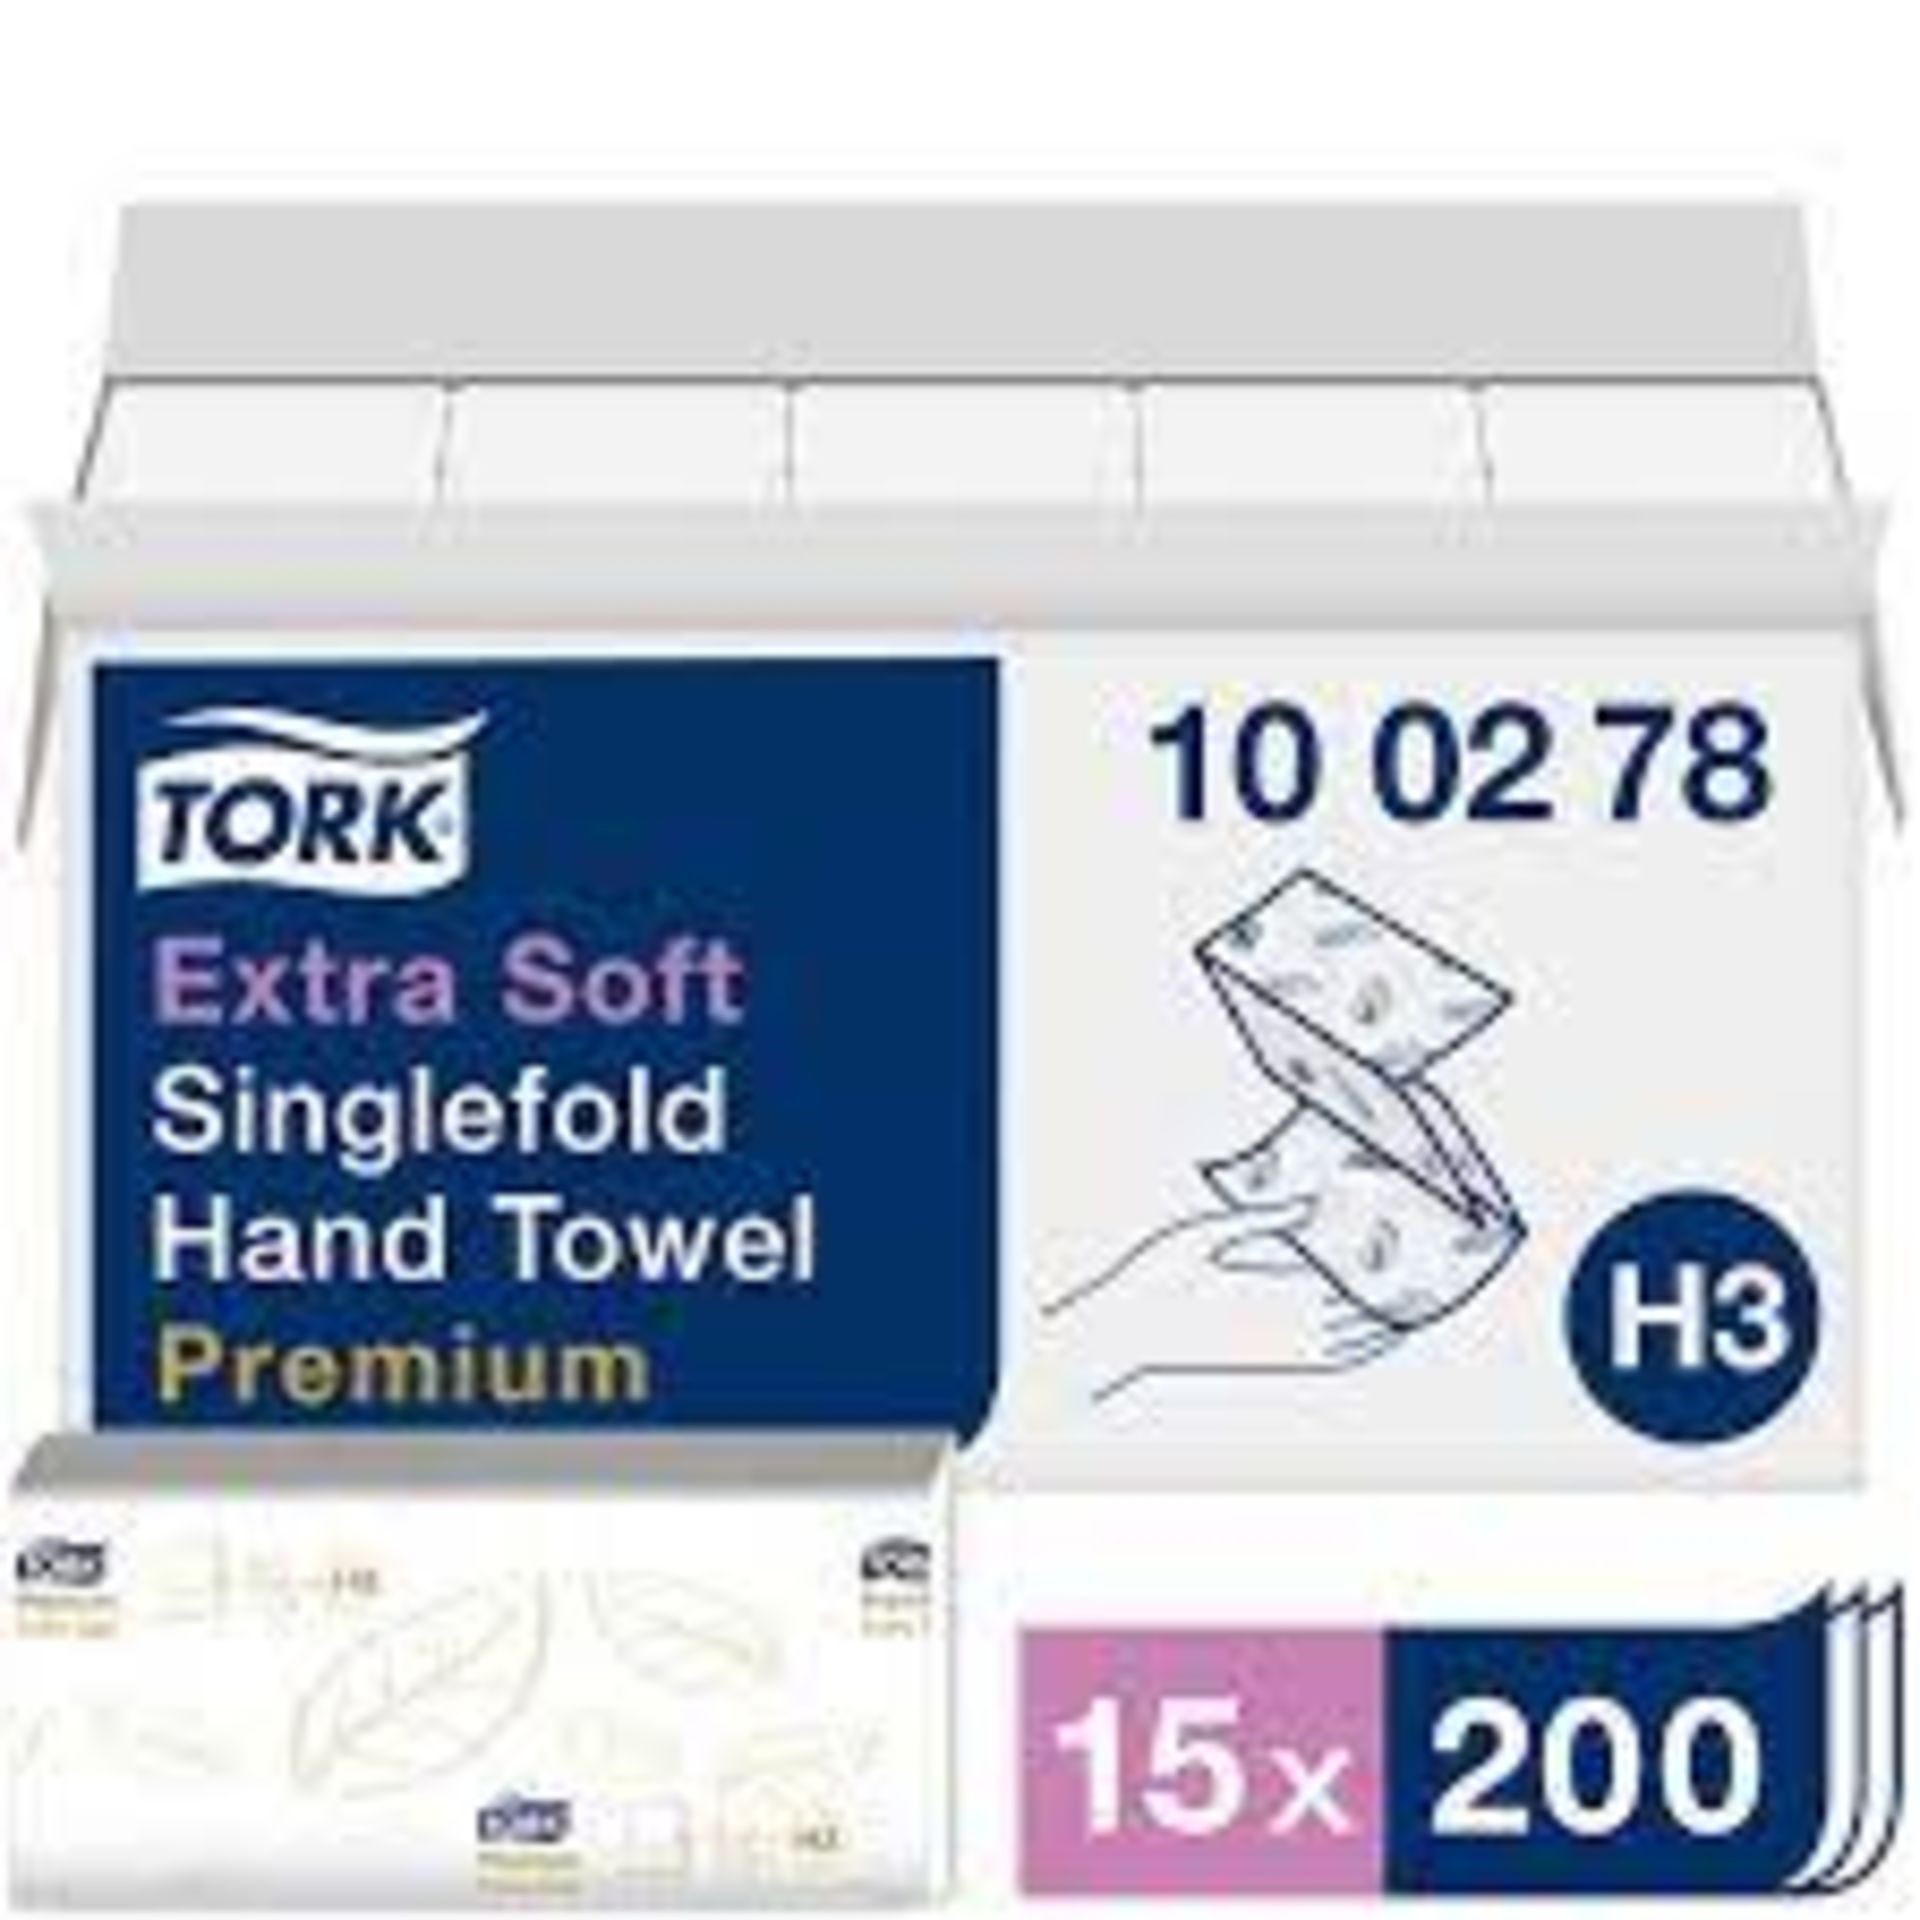 RRP - £42.00 Tork Extra Soft Singlefold Hand Towels White H3, Premium, Embossed, 15 x 200 Sheets, 10